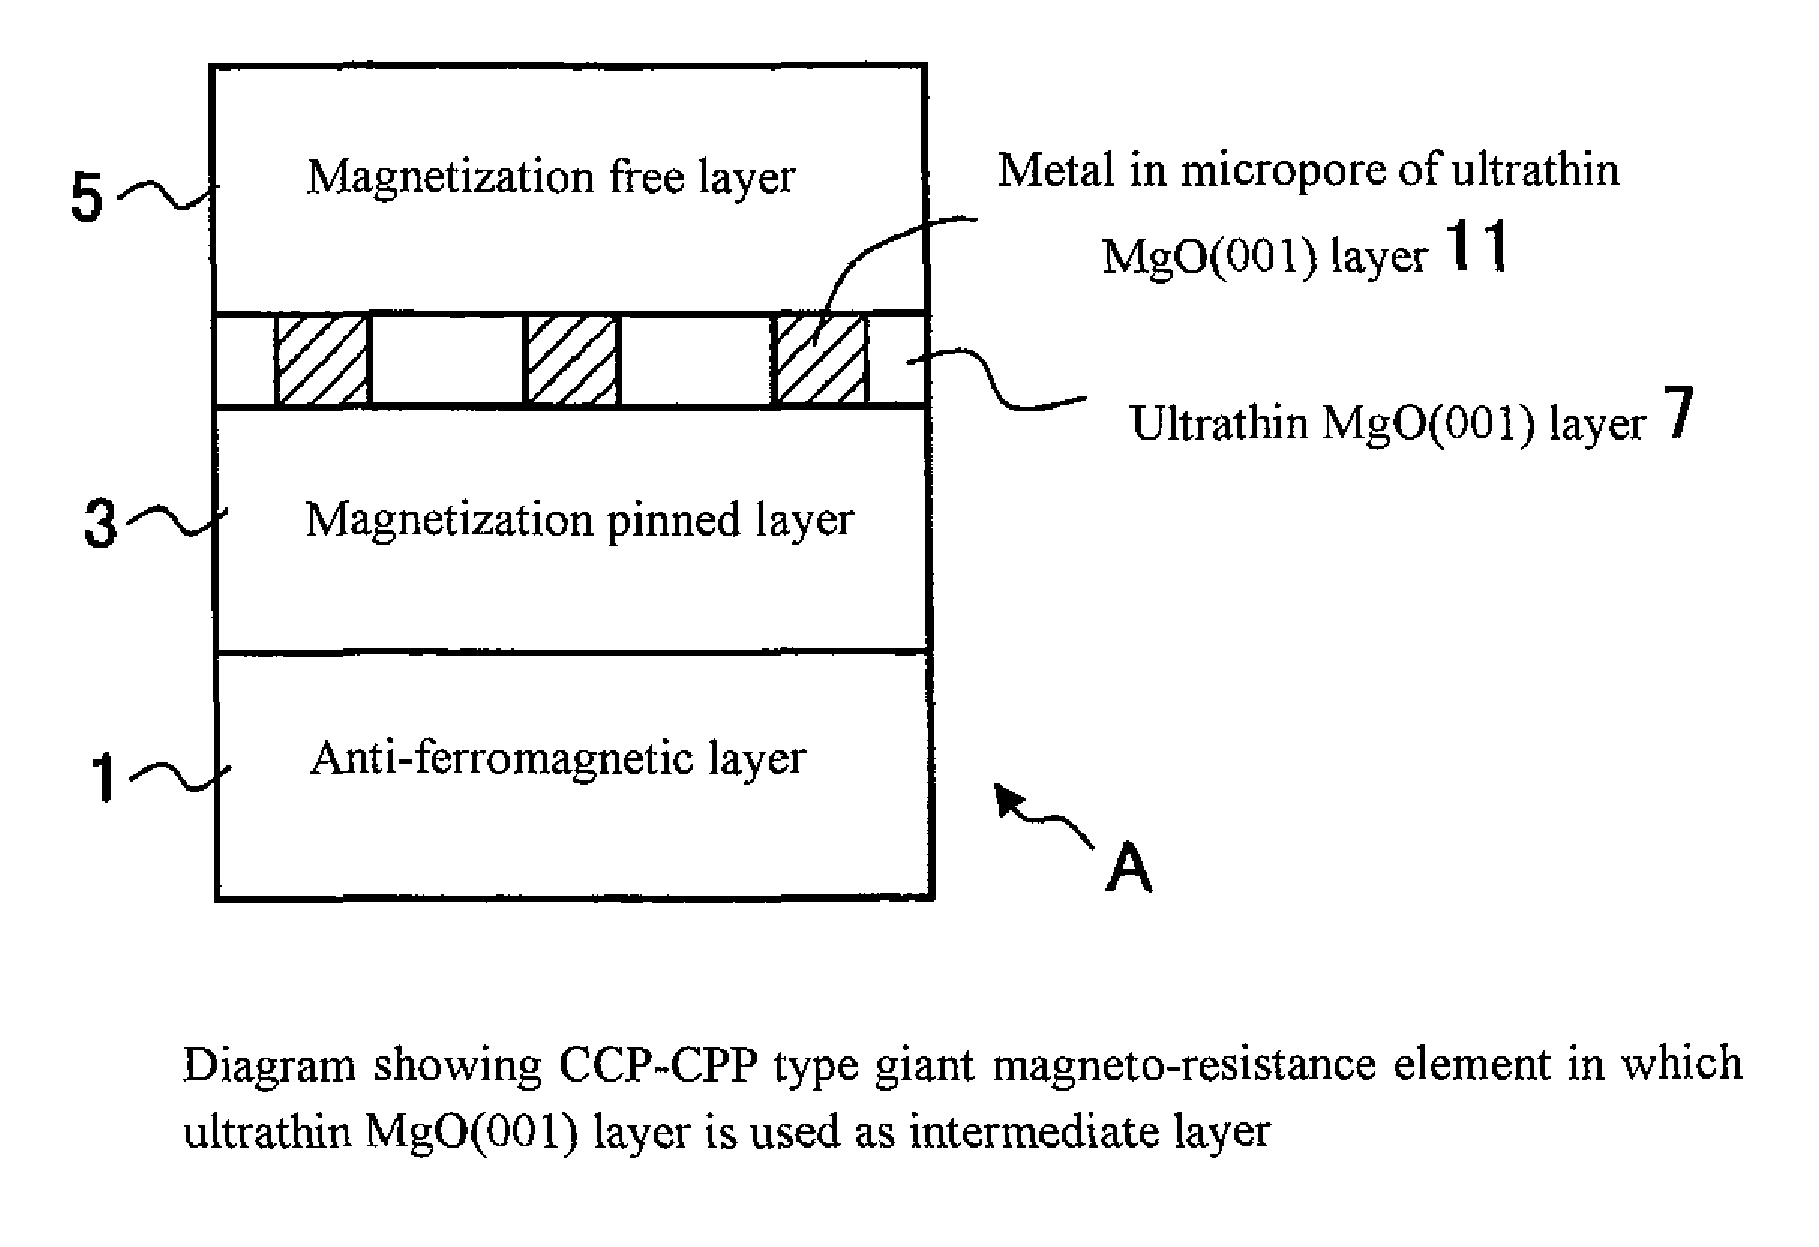 Cpp type giant magneto-resistance element and magnetic sensor